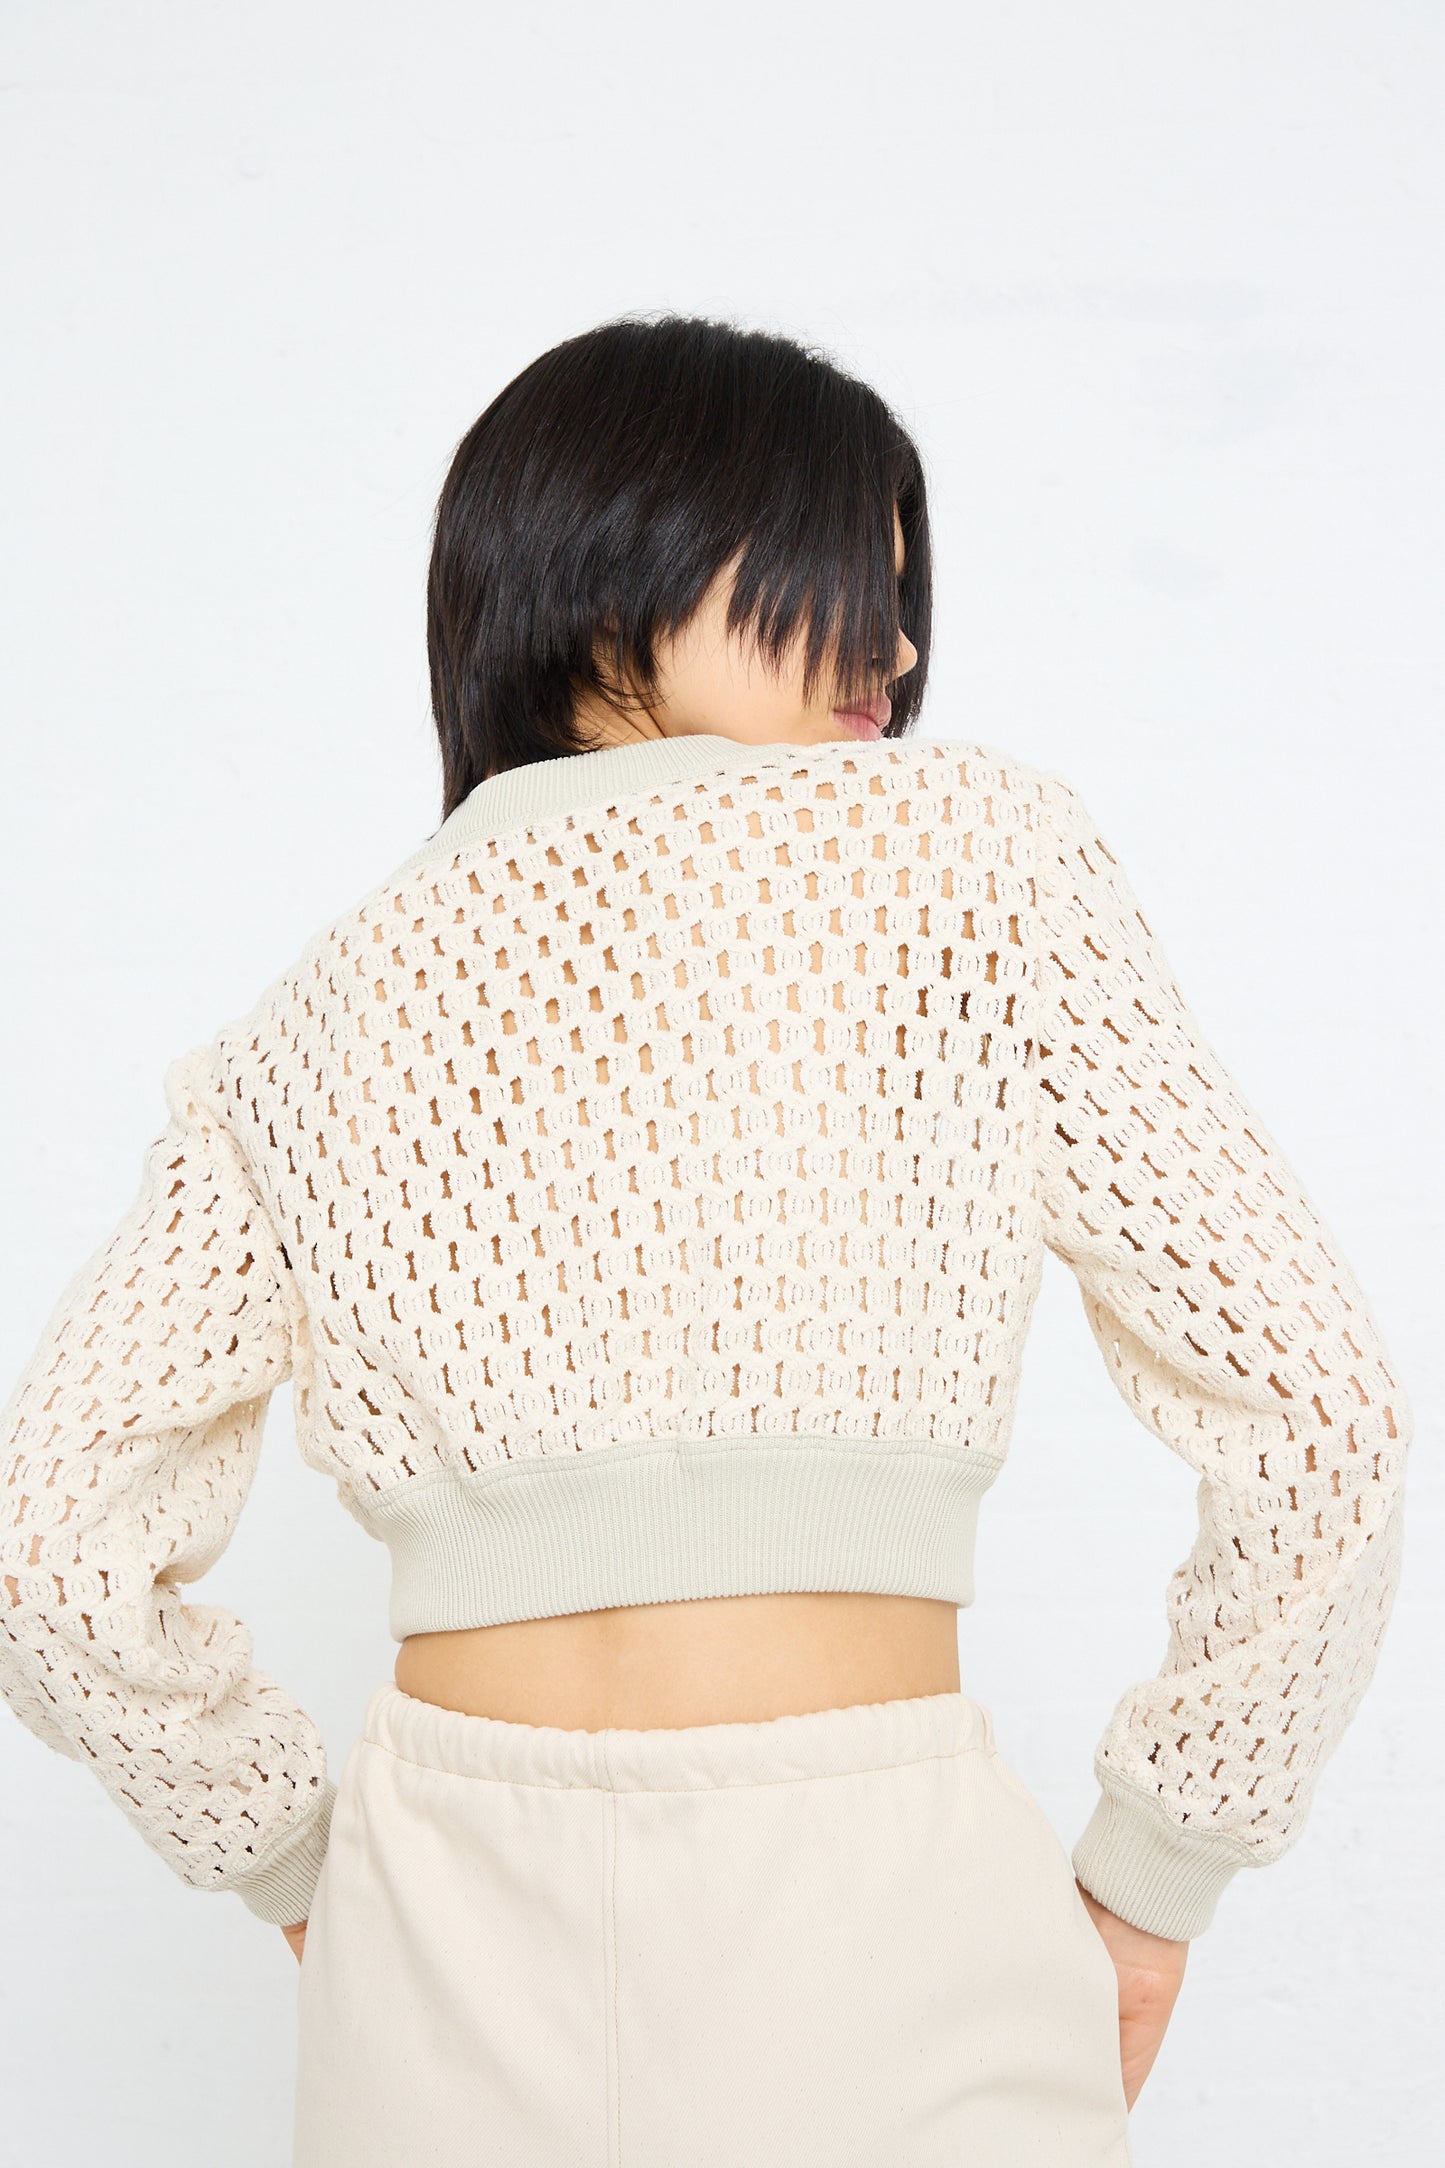 A woman with her back to the camera wearing a Cotton Macro Mesh Cropped Sweater in Ivory by Veronique Leroy with a knit pattern and high-waisted trousers.